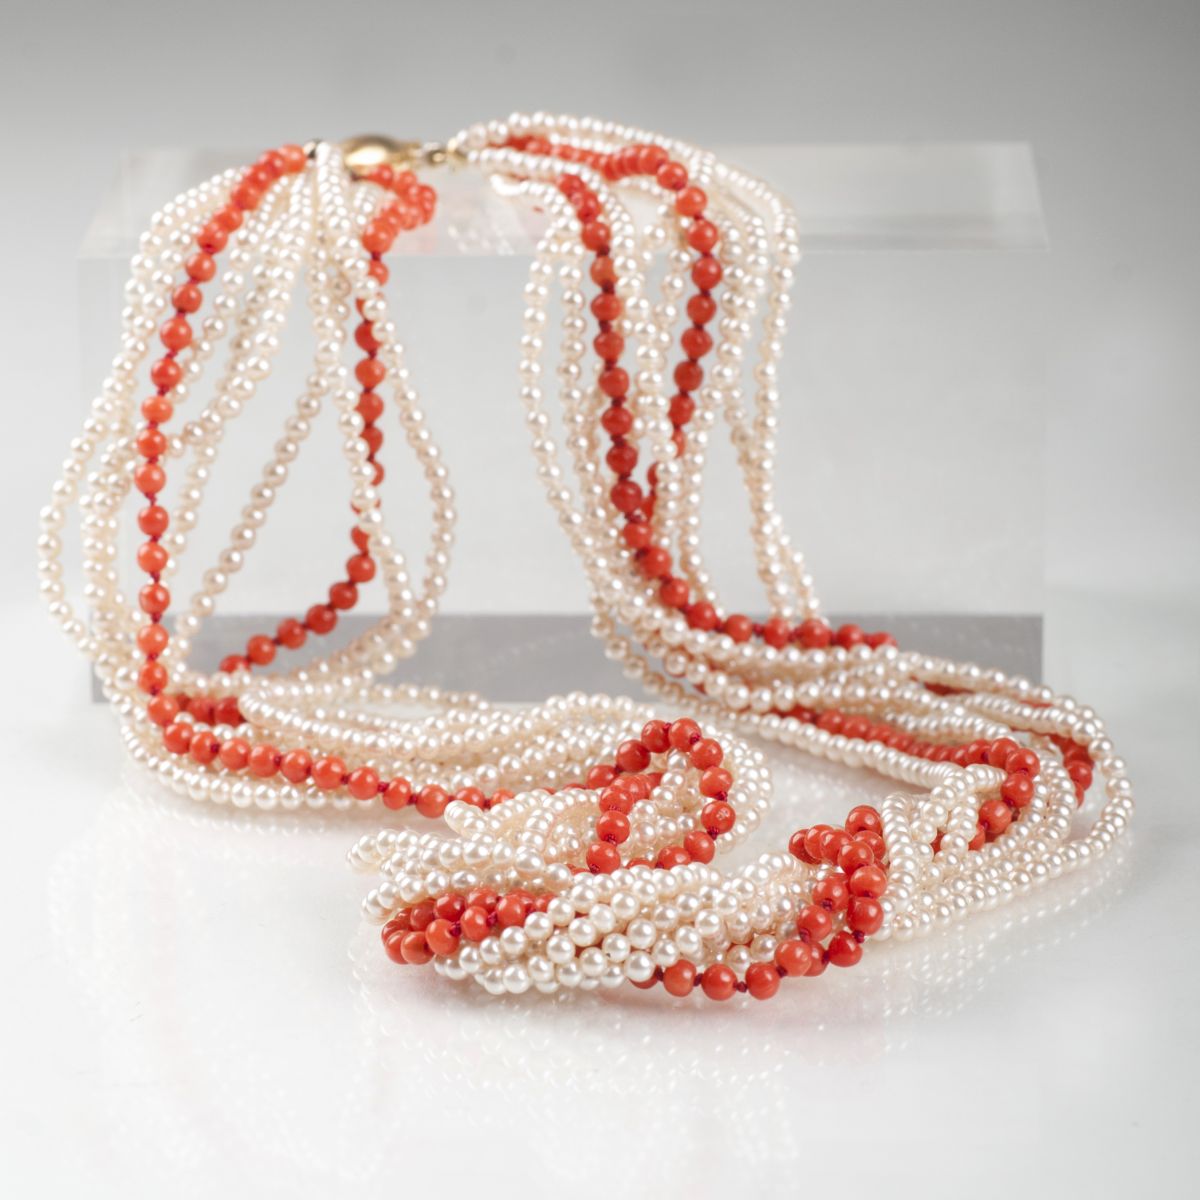 A seedpearl necklace with coral